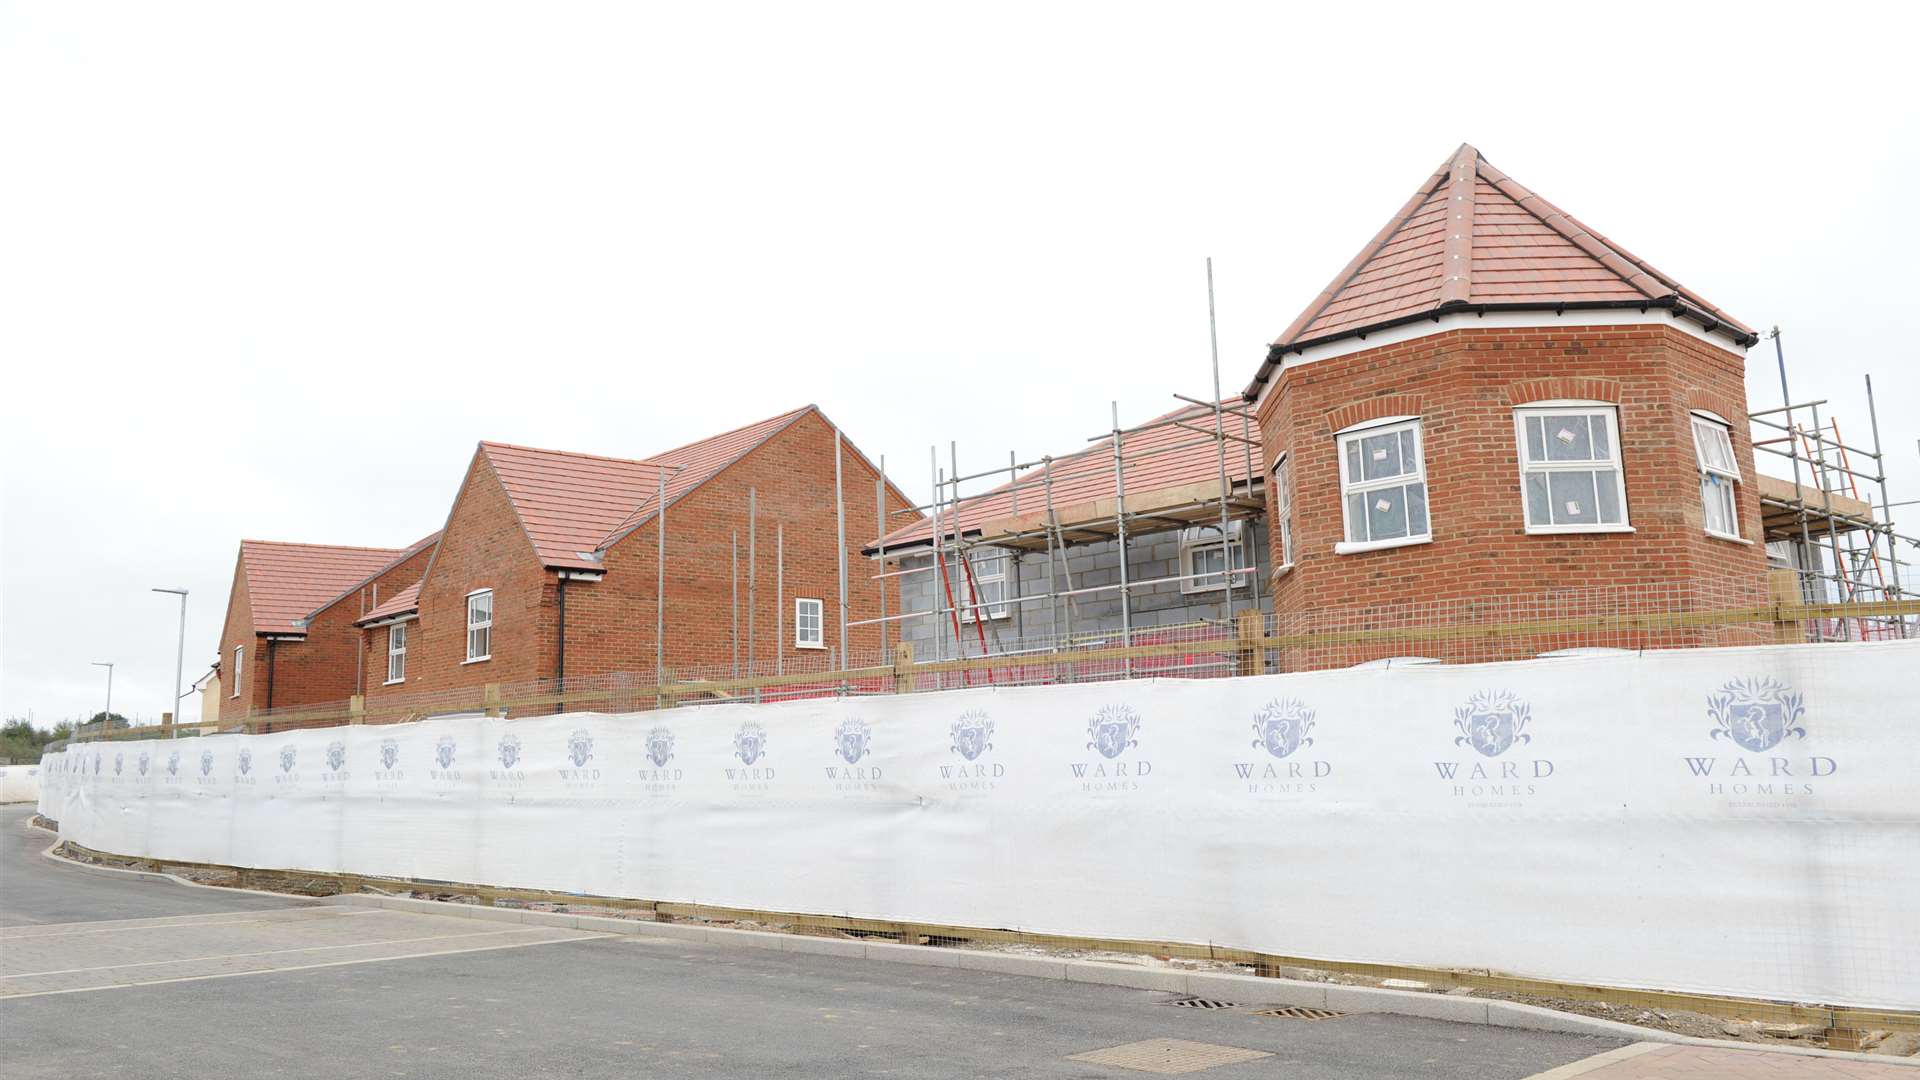 Ward Homes built the first houses at Castle Hill in Ebbsfleet Garden City